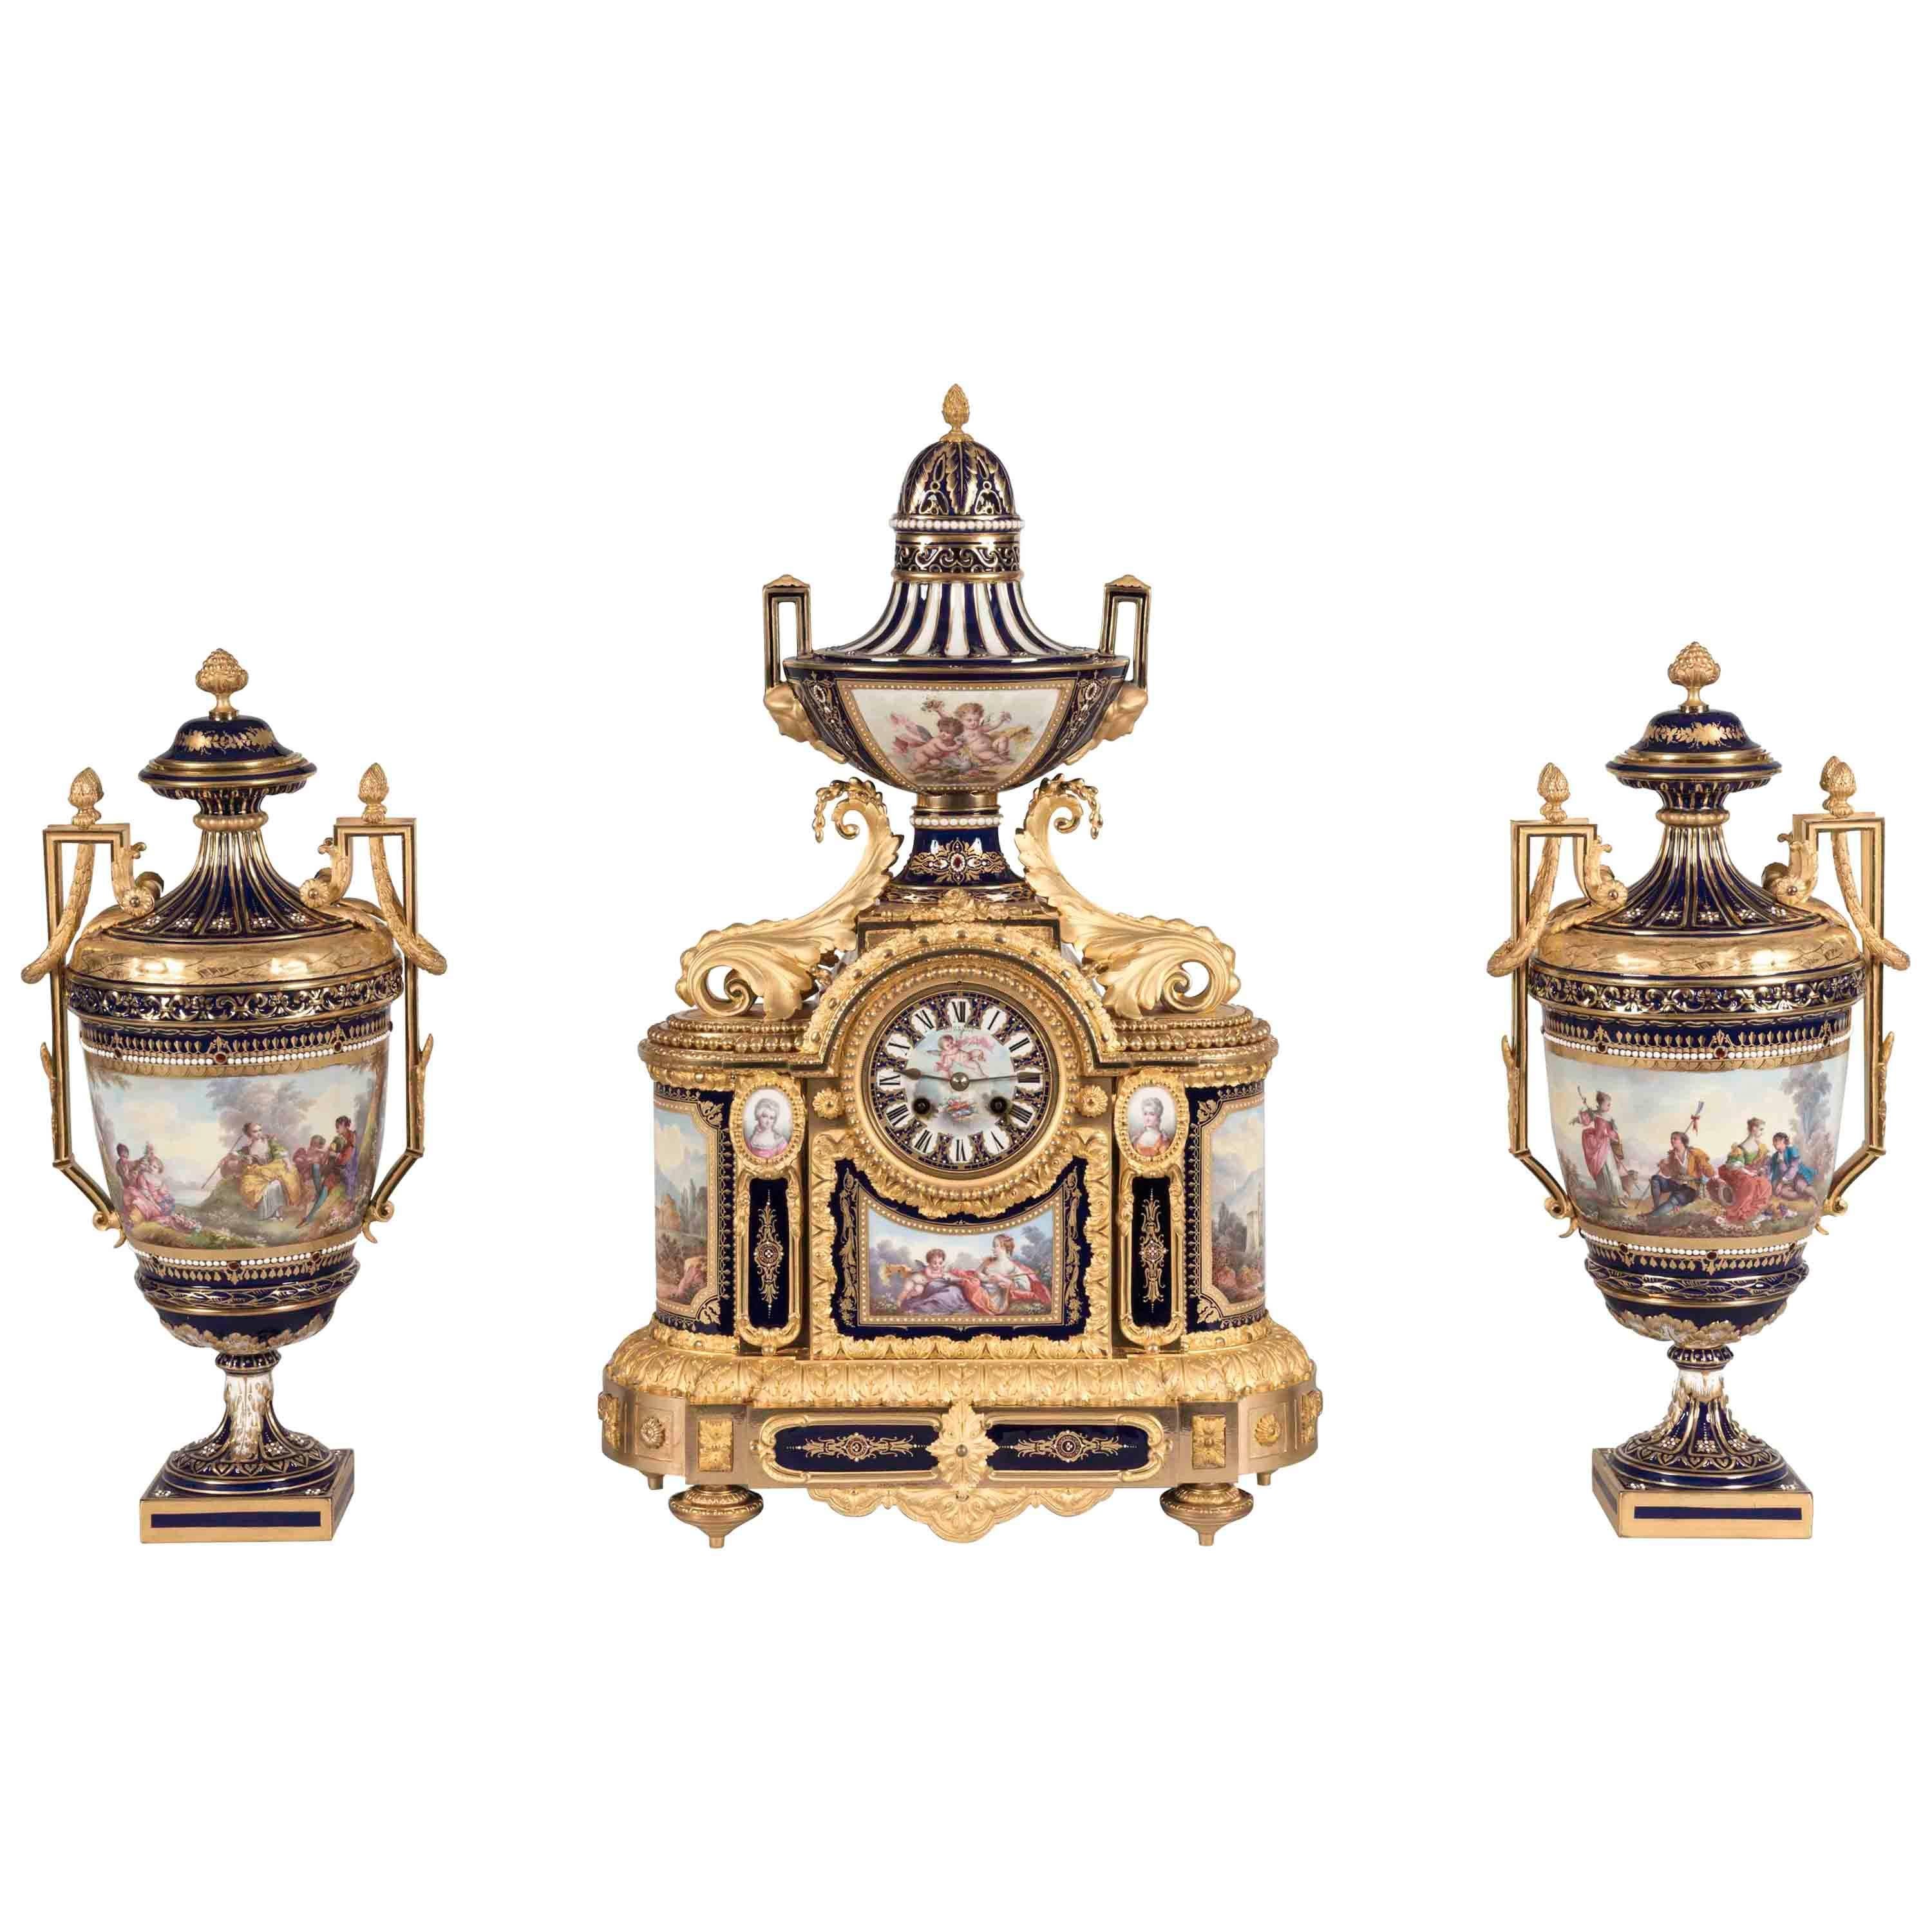 19th Century French Louis XVI Clock Garniture with Sévres Porcelain and Ormolu